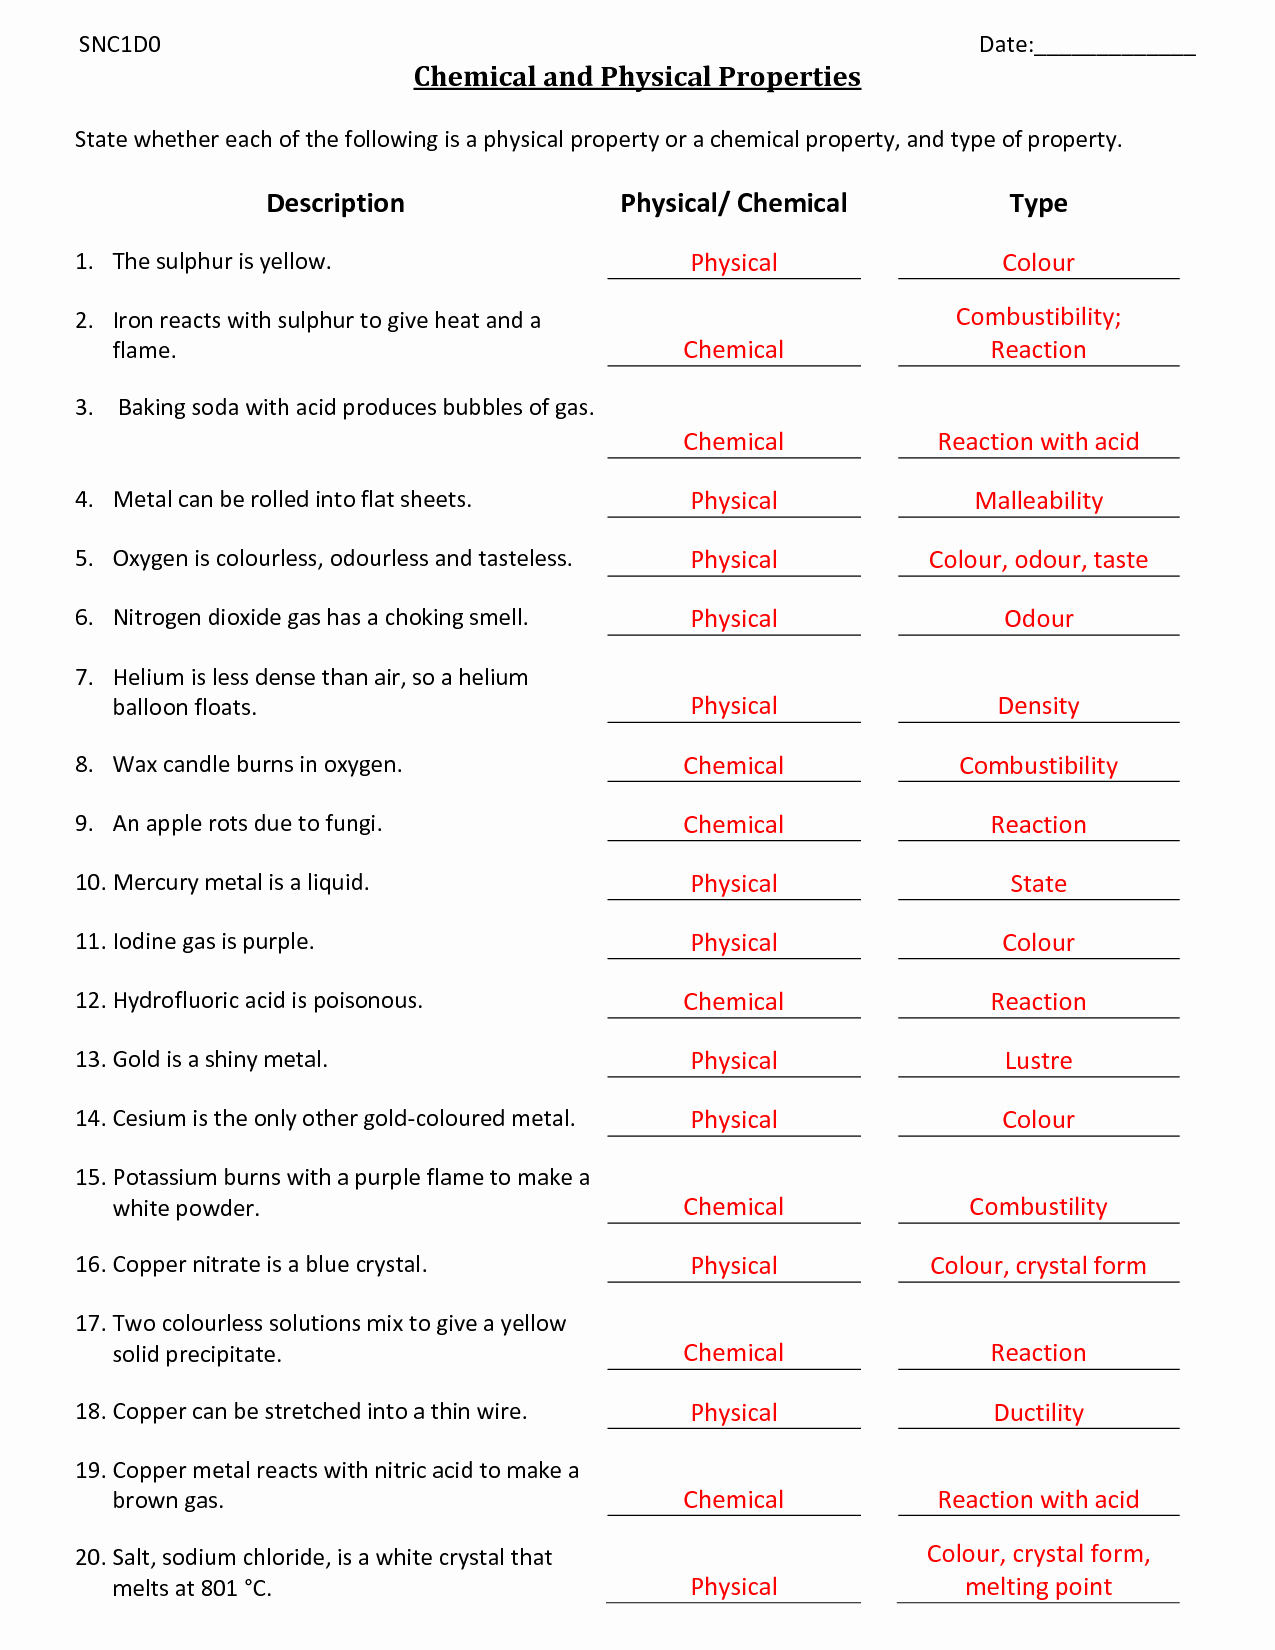 Chemical and Physical Change Worksheet Beautiful Physical Vs Chemical Properties Worksheets